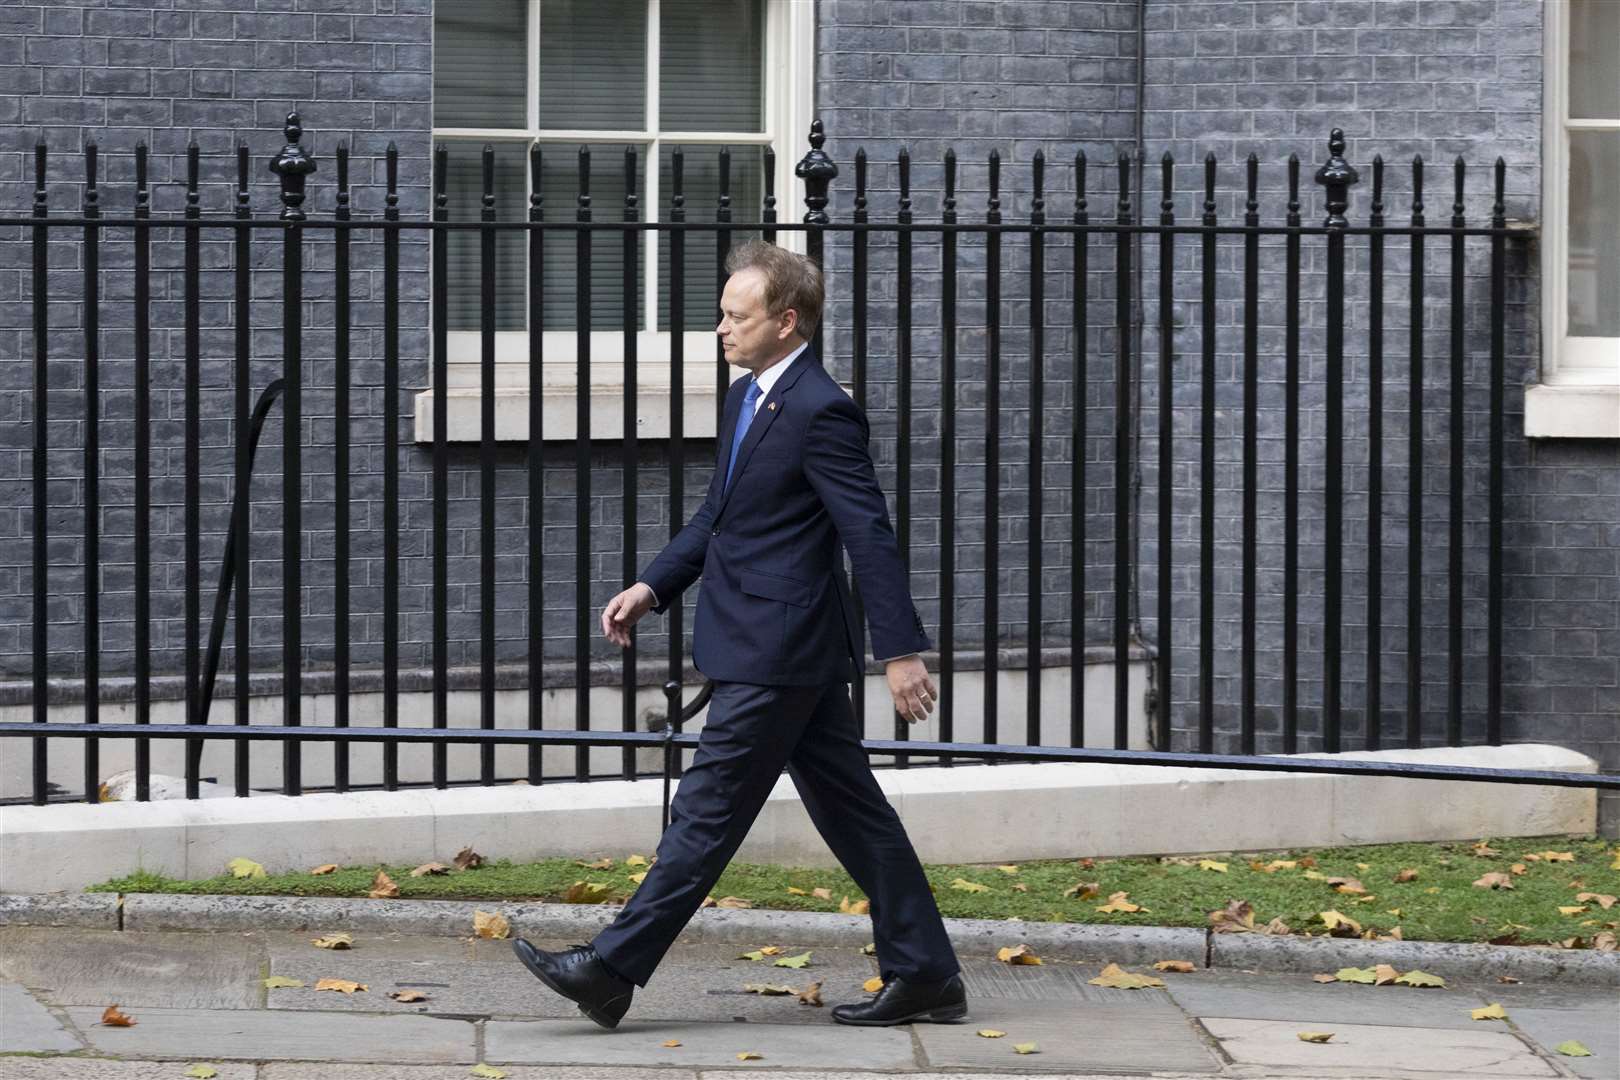 Grant Shapps arrives at 10 Downing Street after the resignation of home secretary Suella Braverman (Belinda Jiao/PA)